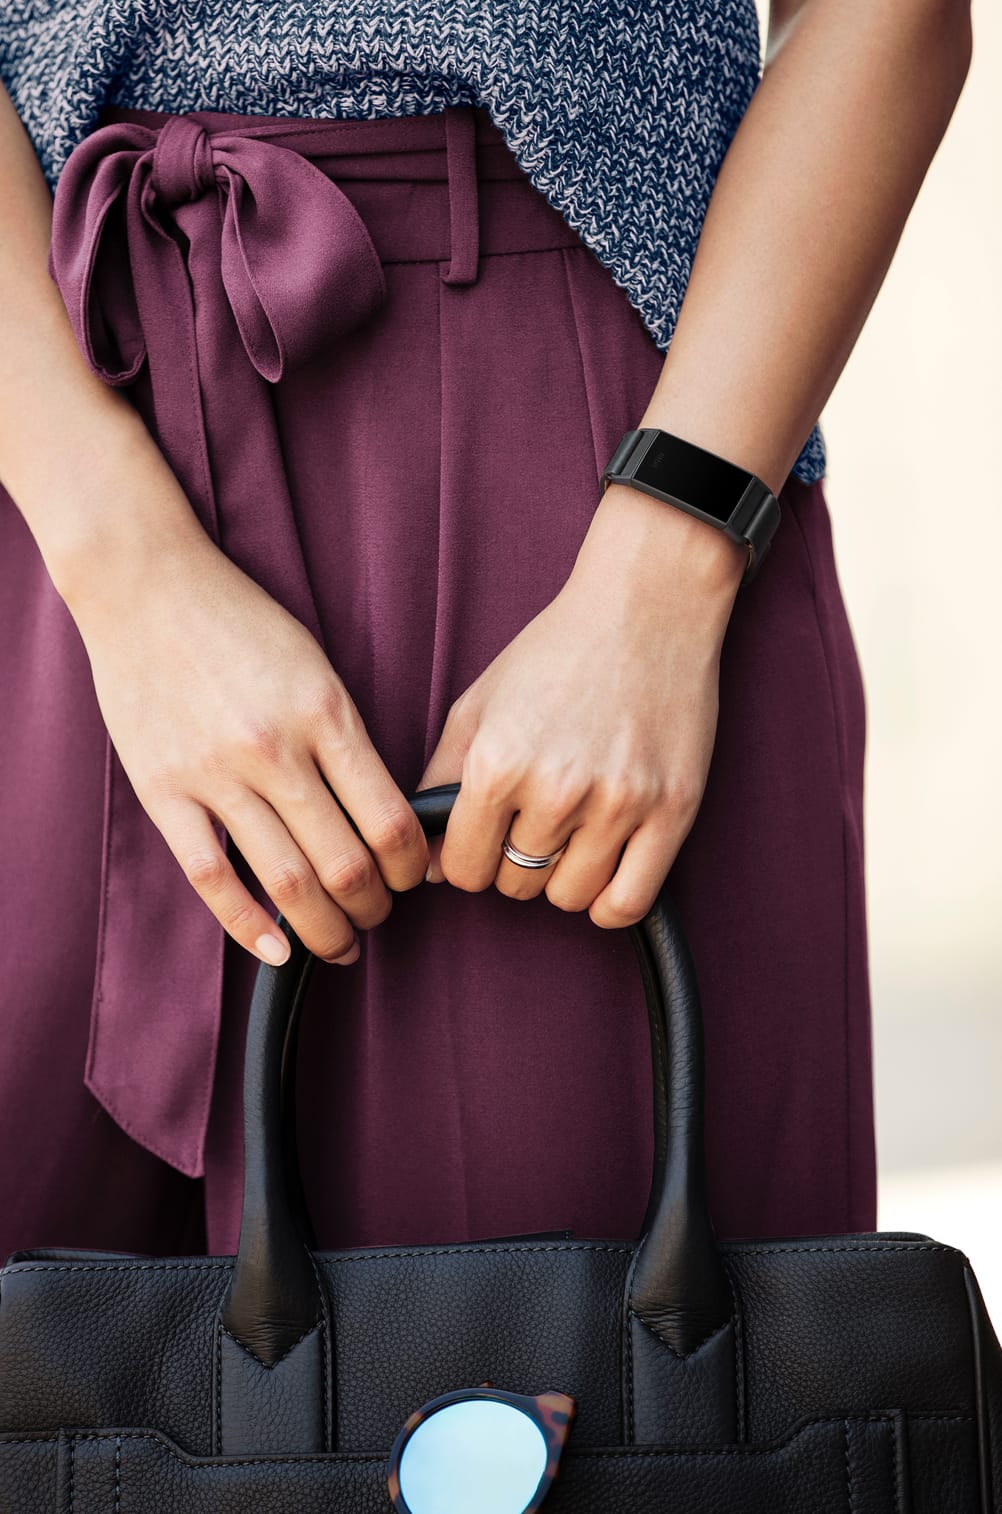 black fitbit charge 4